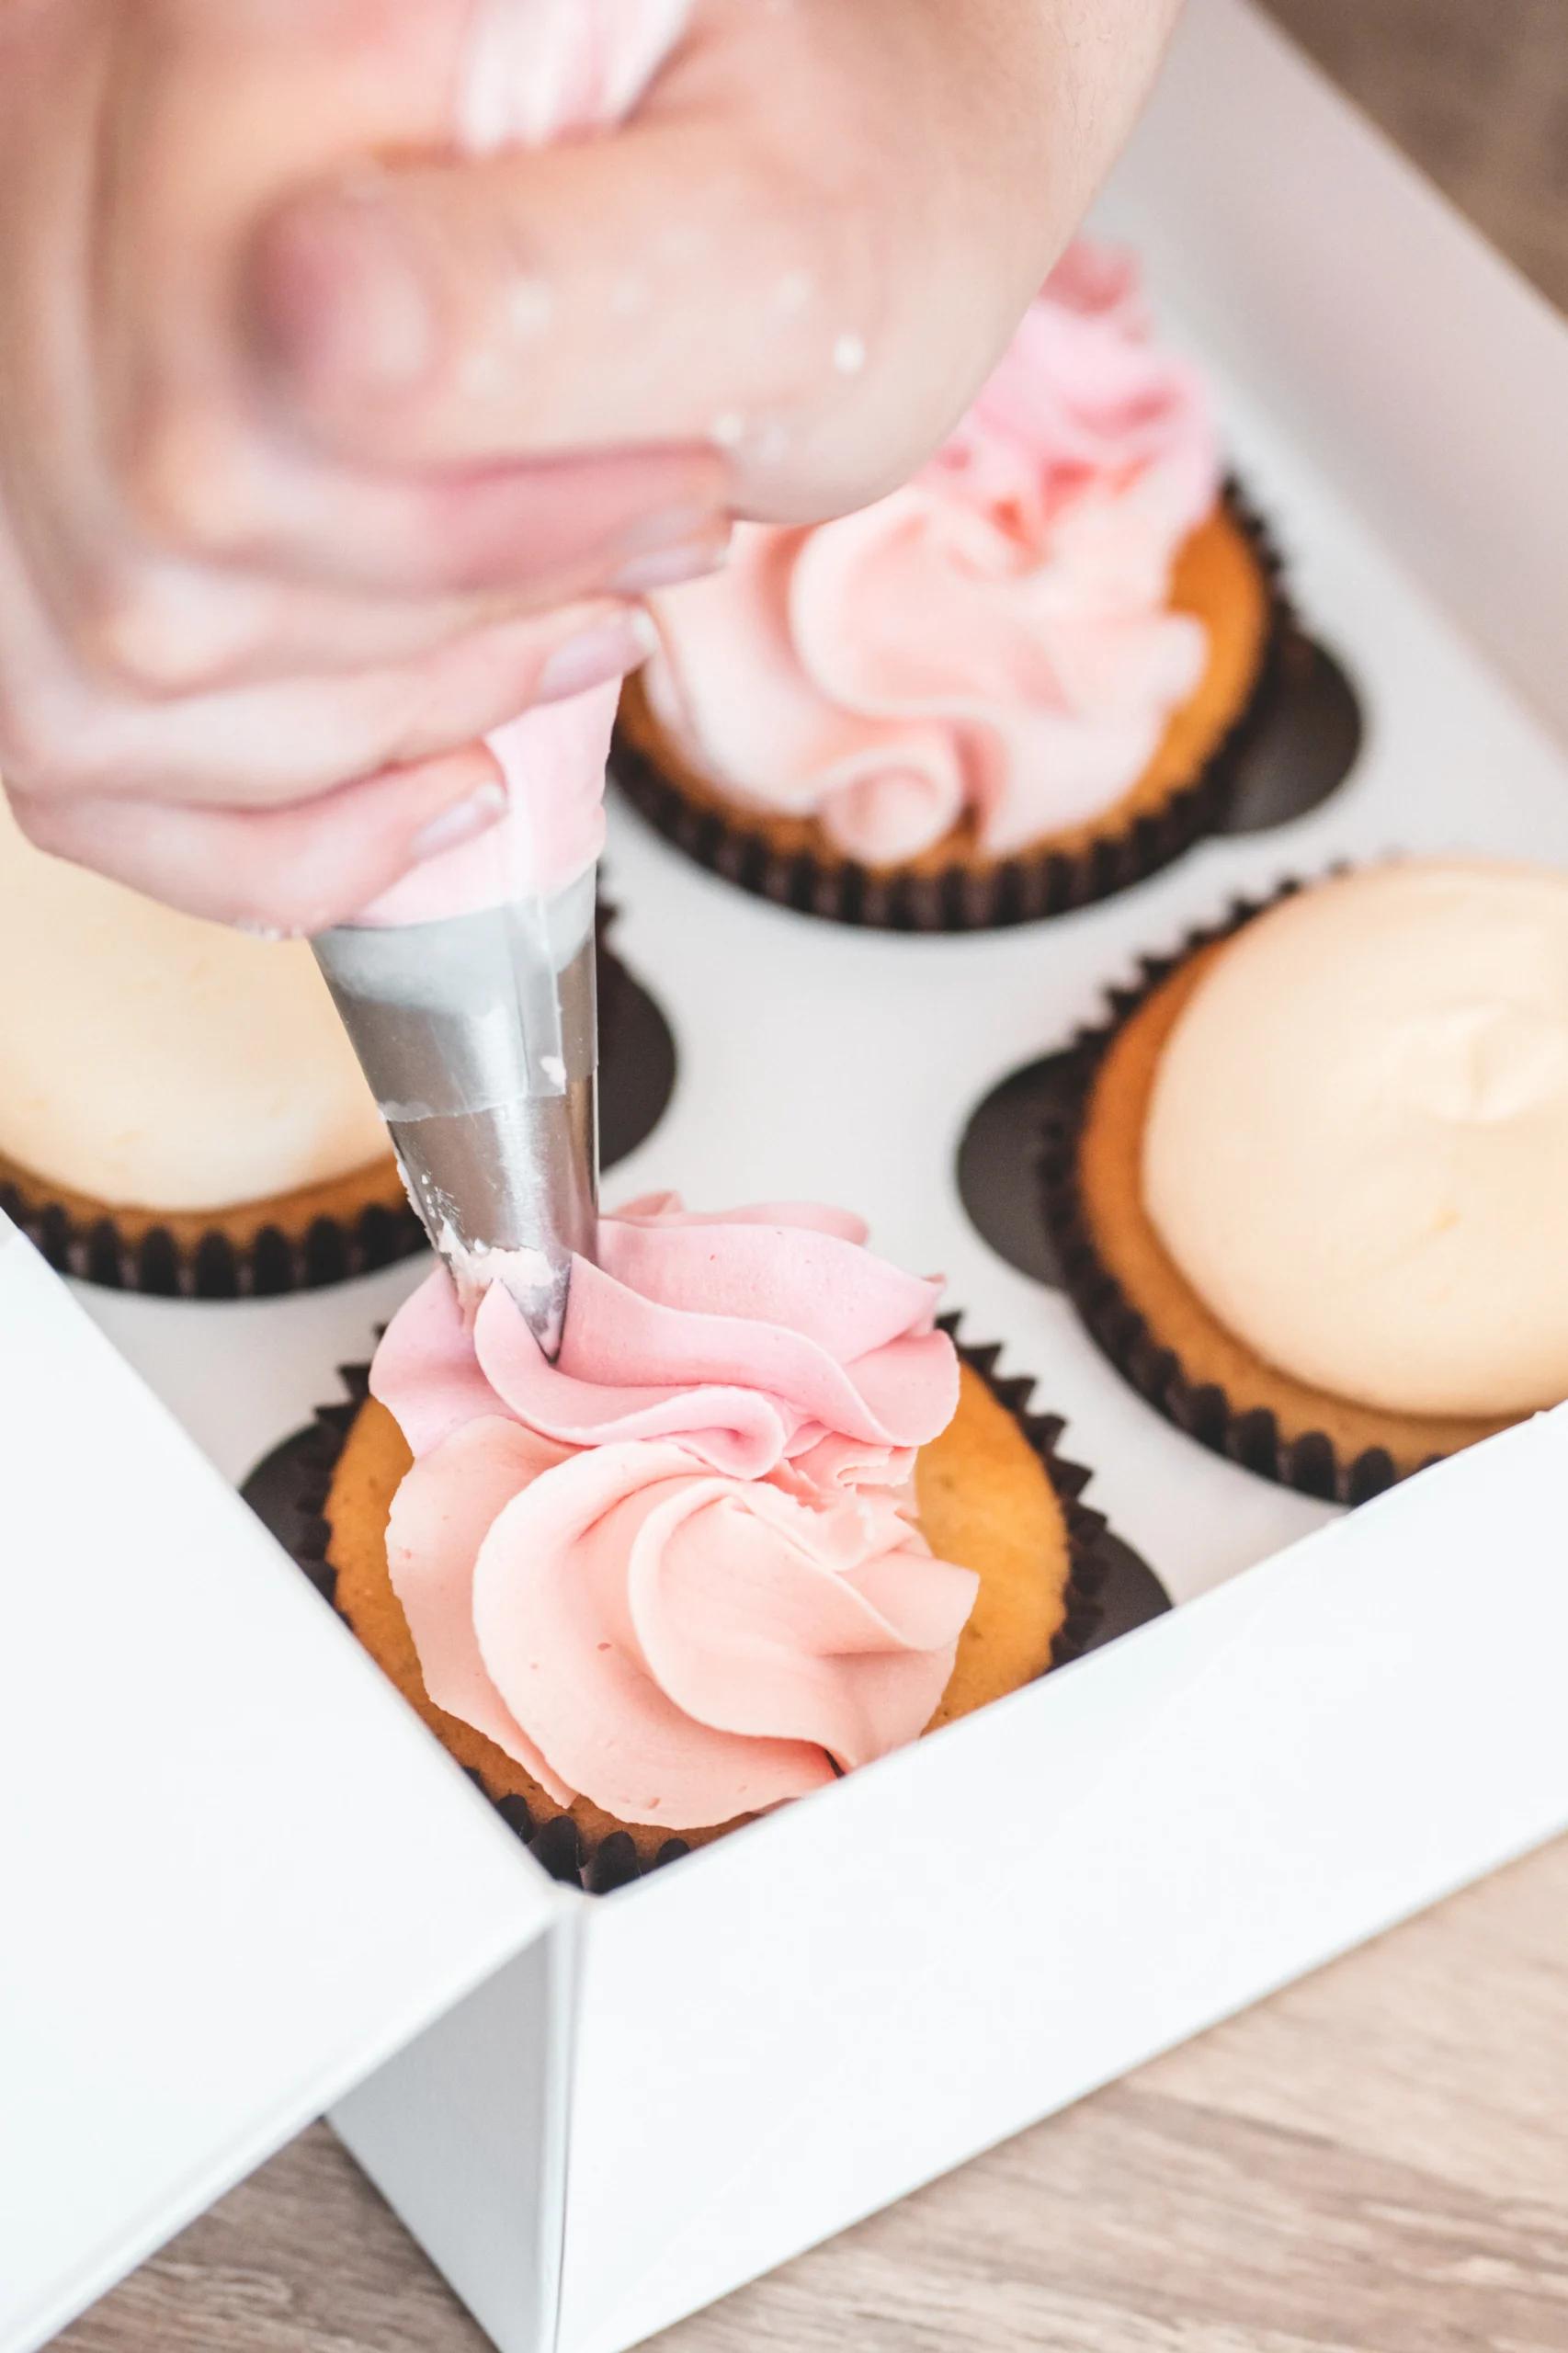 A pastry chef icing a cupcake